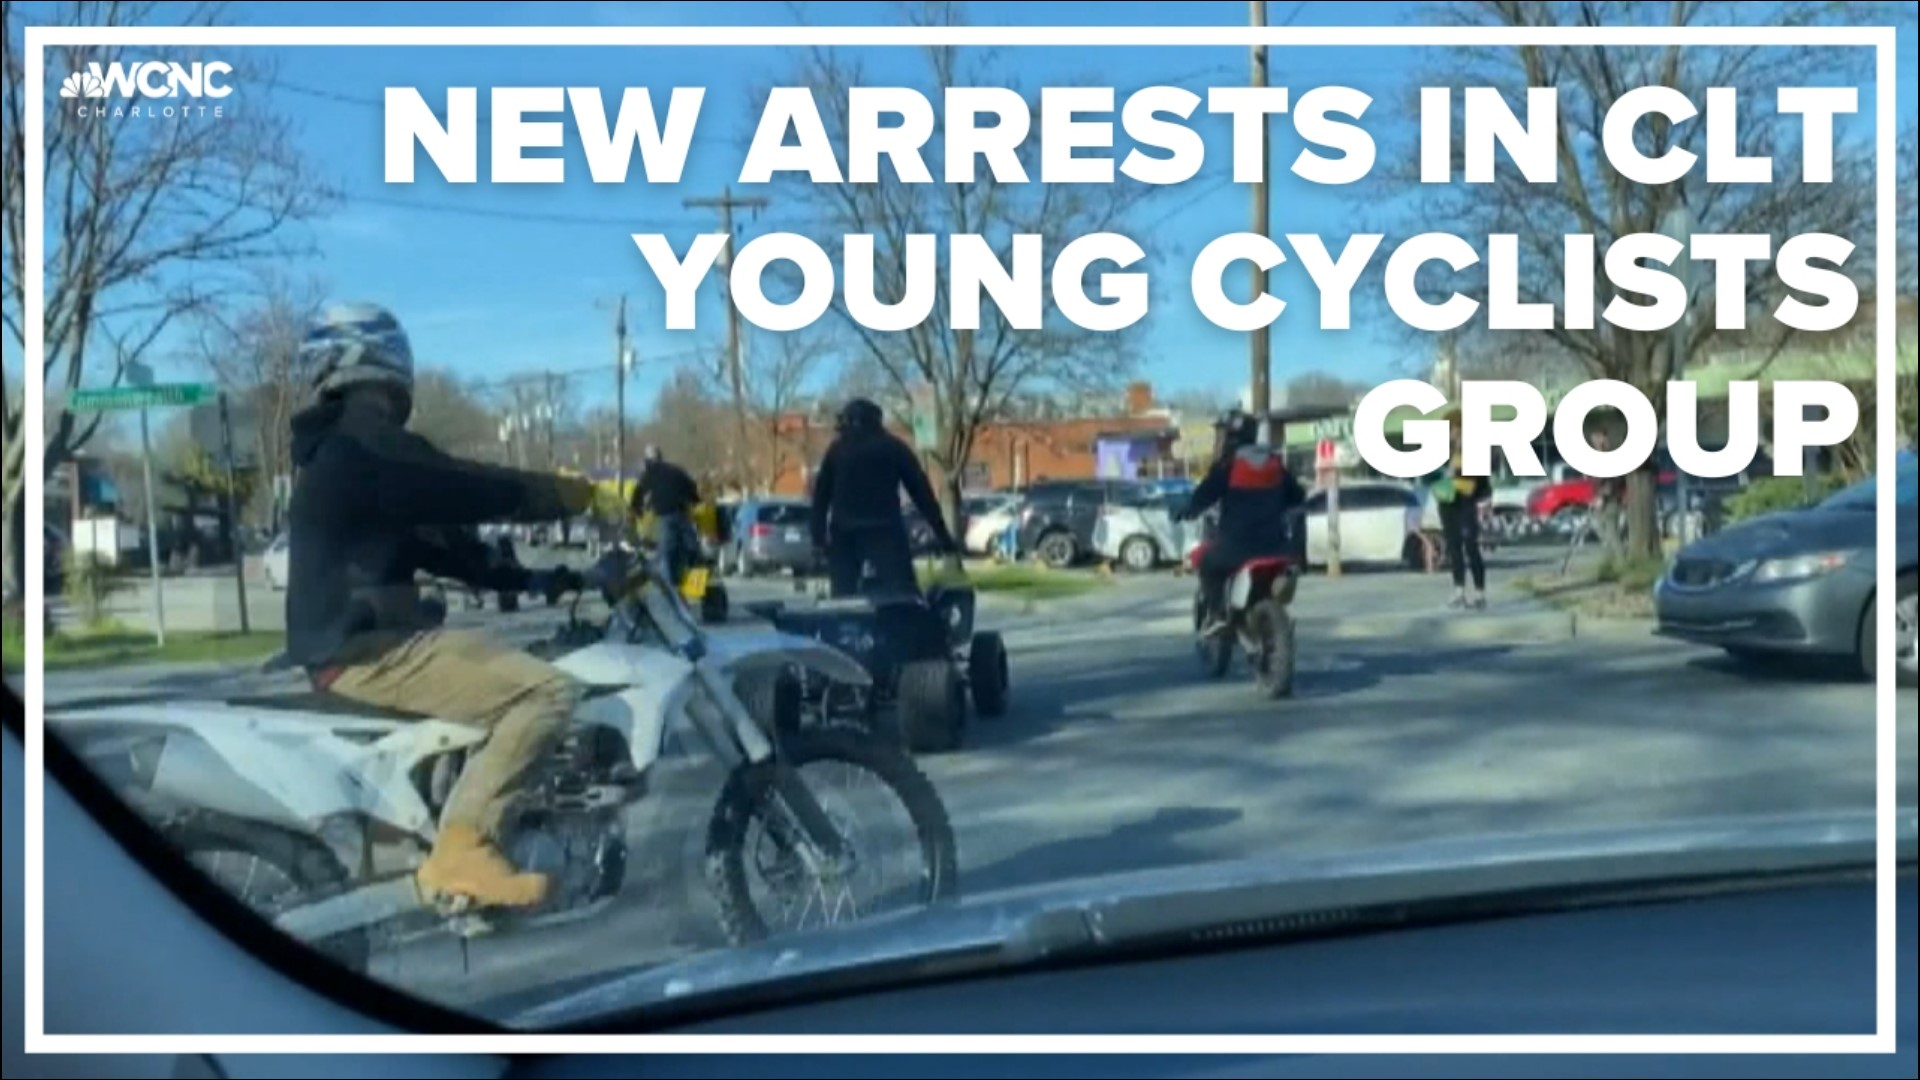 An ongoing problem of dangerous bicycle groups riding in and around Uptown is seeing some solutions with the help of recent arrests made by CMPD.